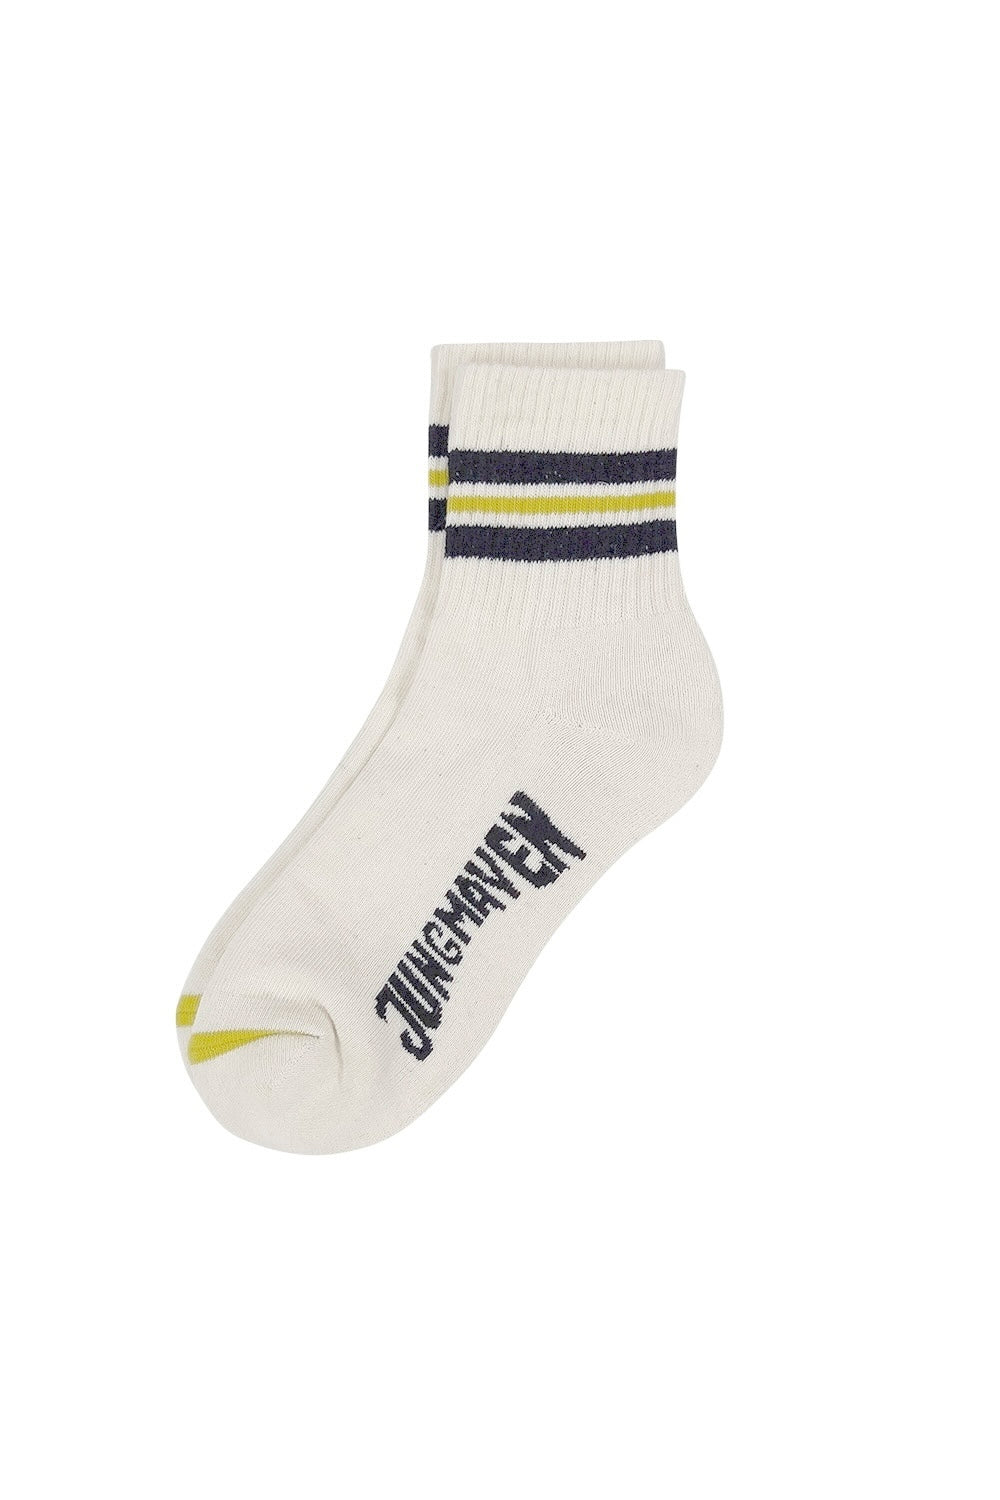 Town and Country Ankle Socks | Jungmaven Hemp Clothing & Accessories / Color: Olive Green/Citrine Yellow 3 Stripe